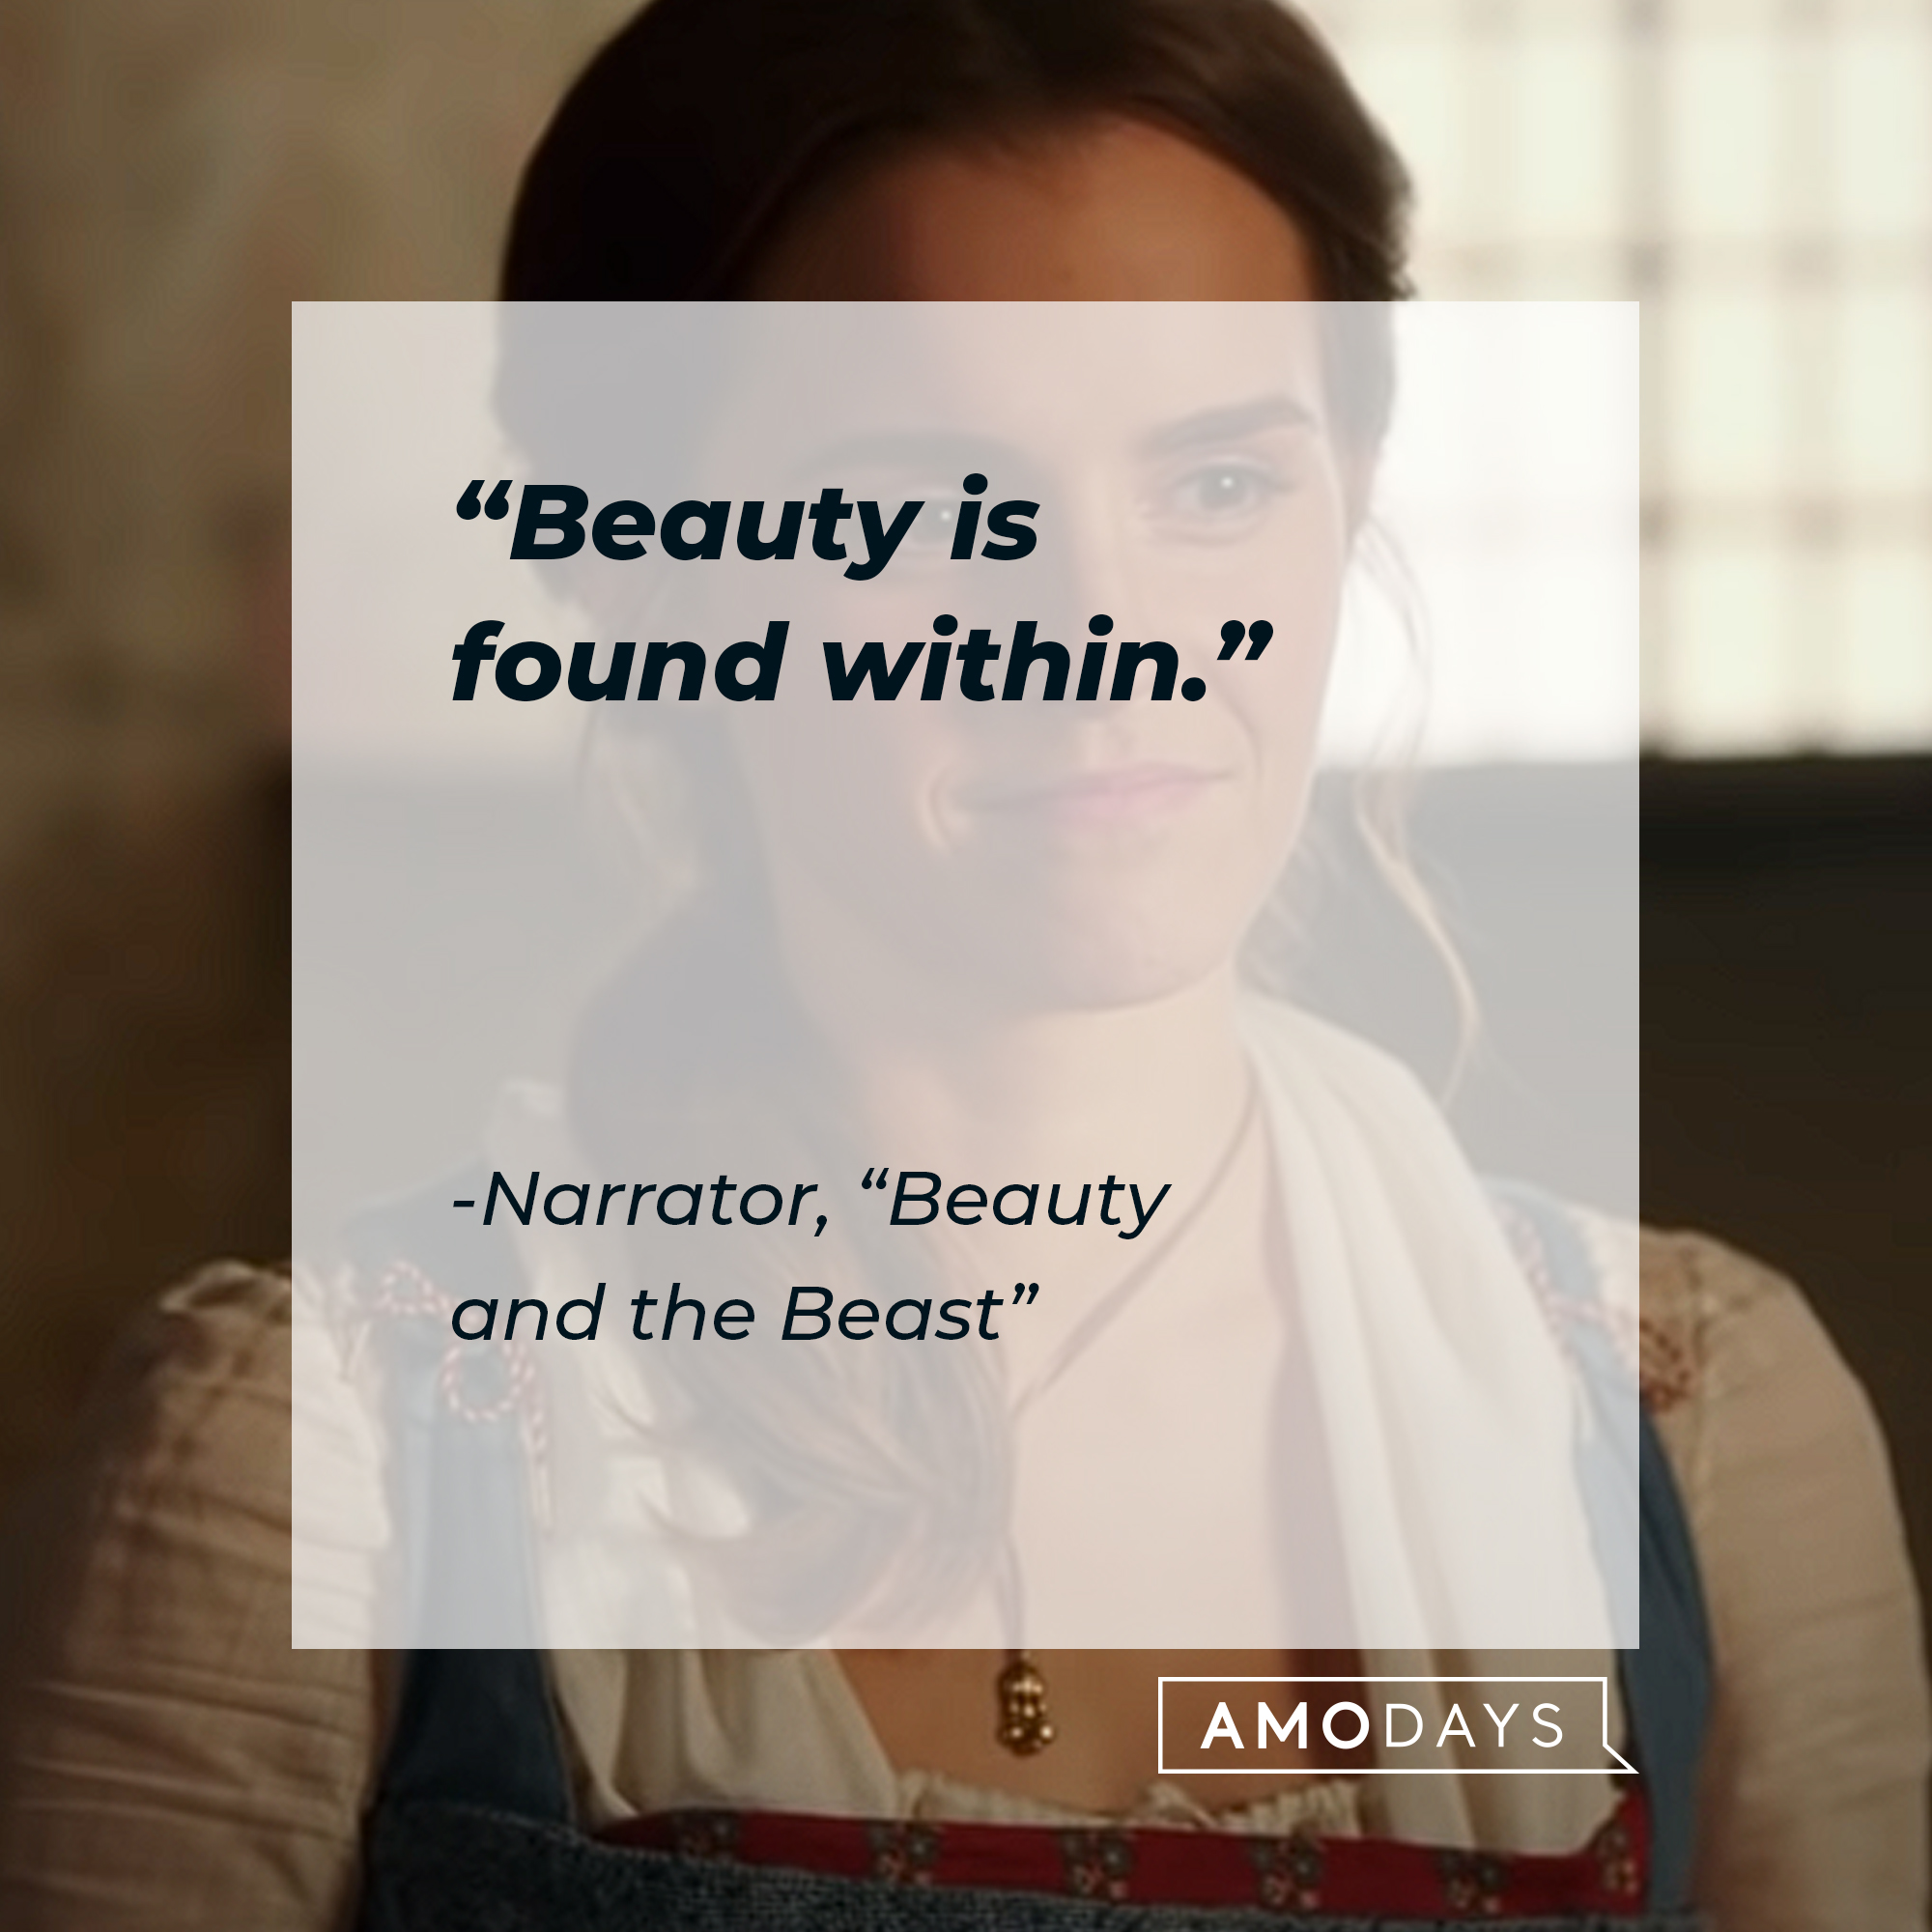 Narrator's "Beauty and the Beast" quote: "Beauty is found within." | Source: Youtube.com/DisneyMovieTrailers